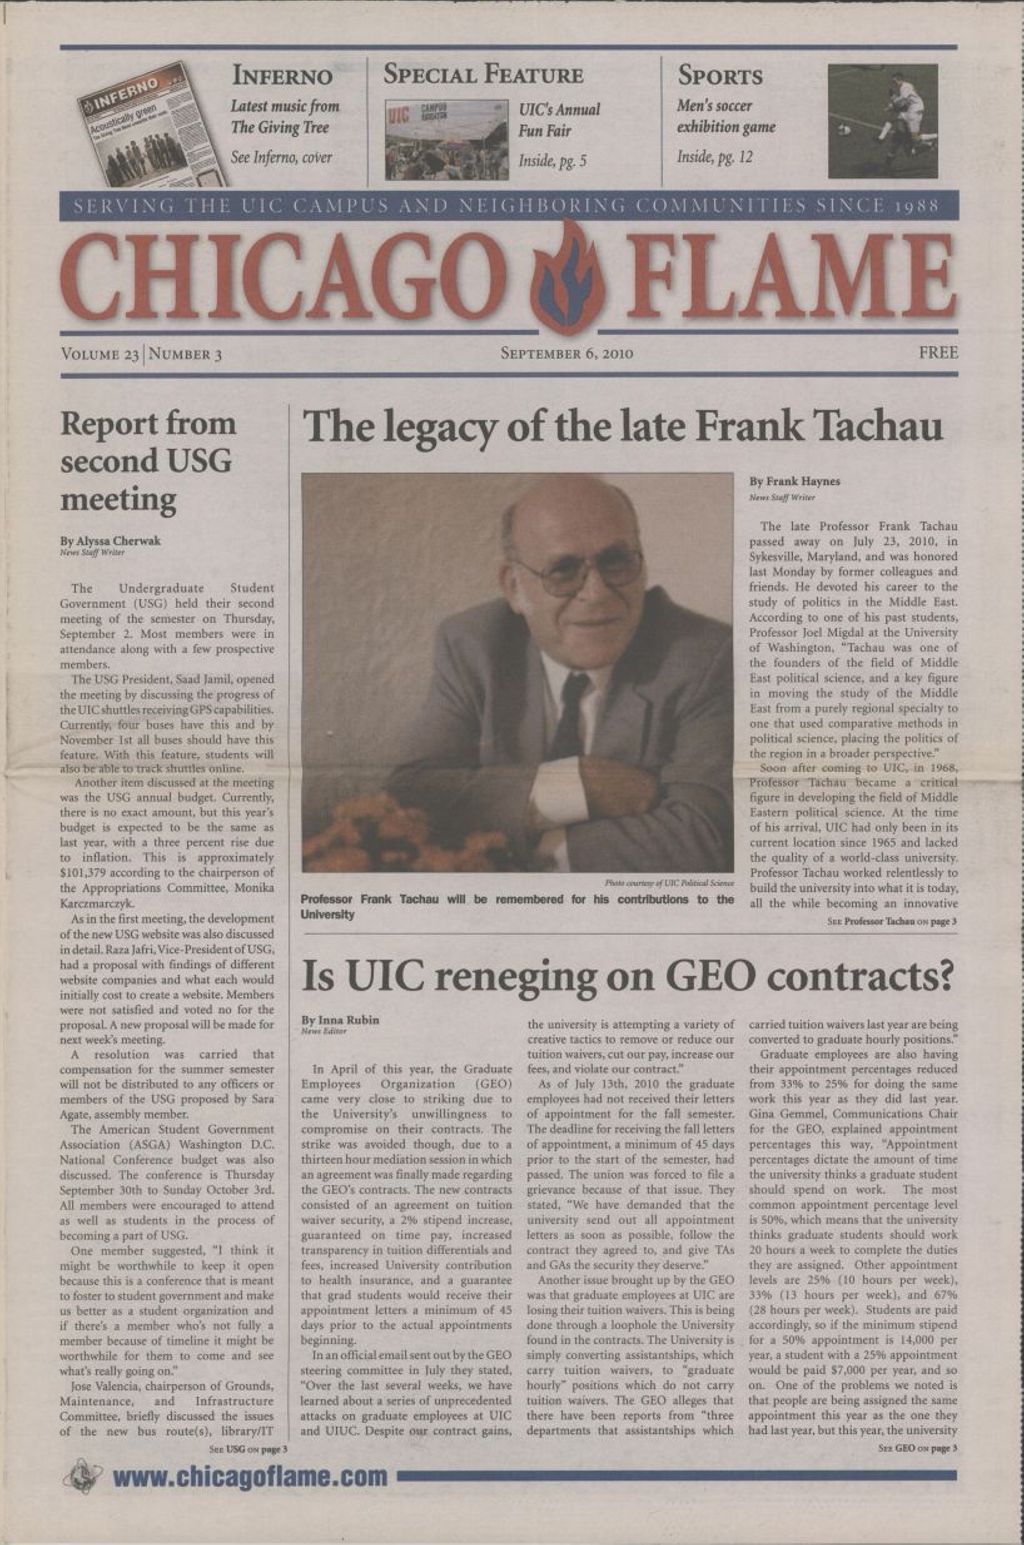 Miniature of Chicago Flame (September 6, 2010)